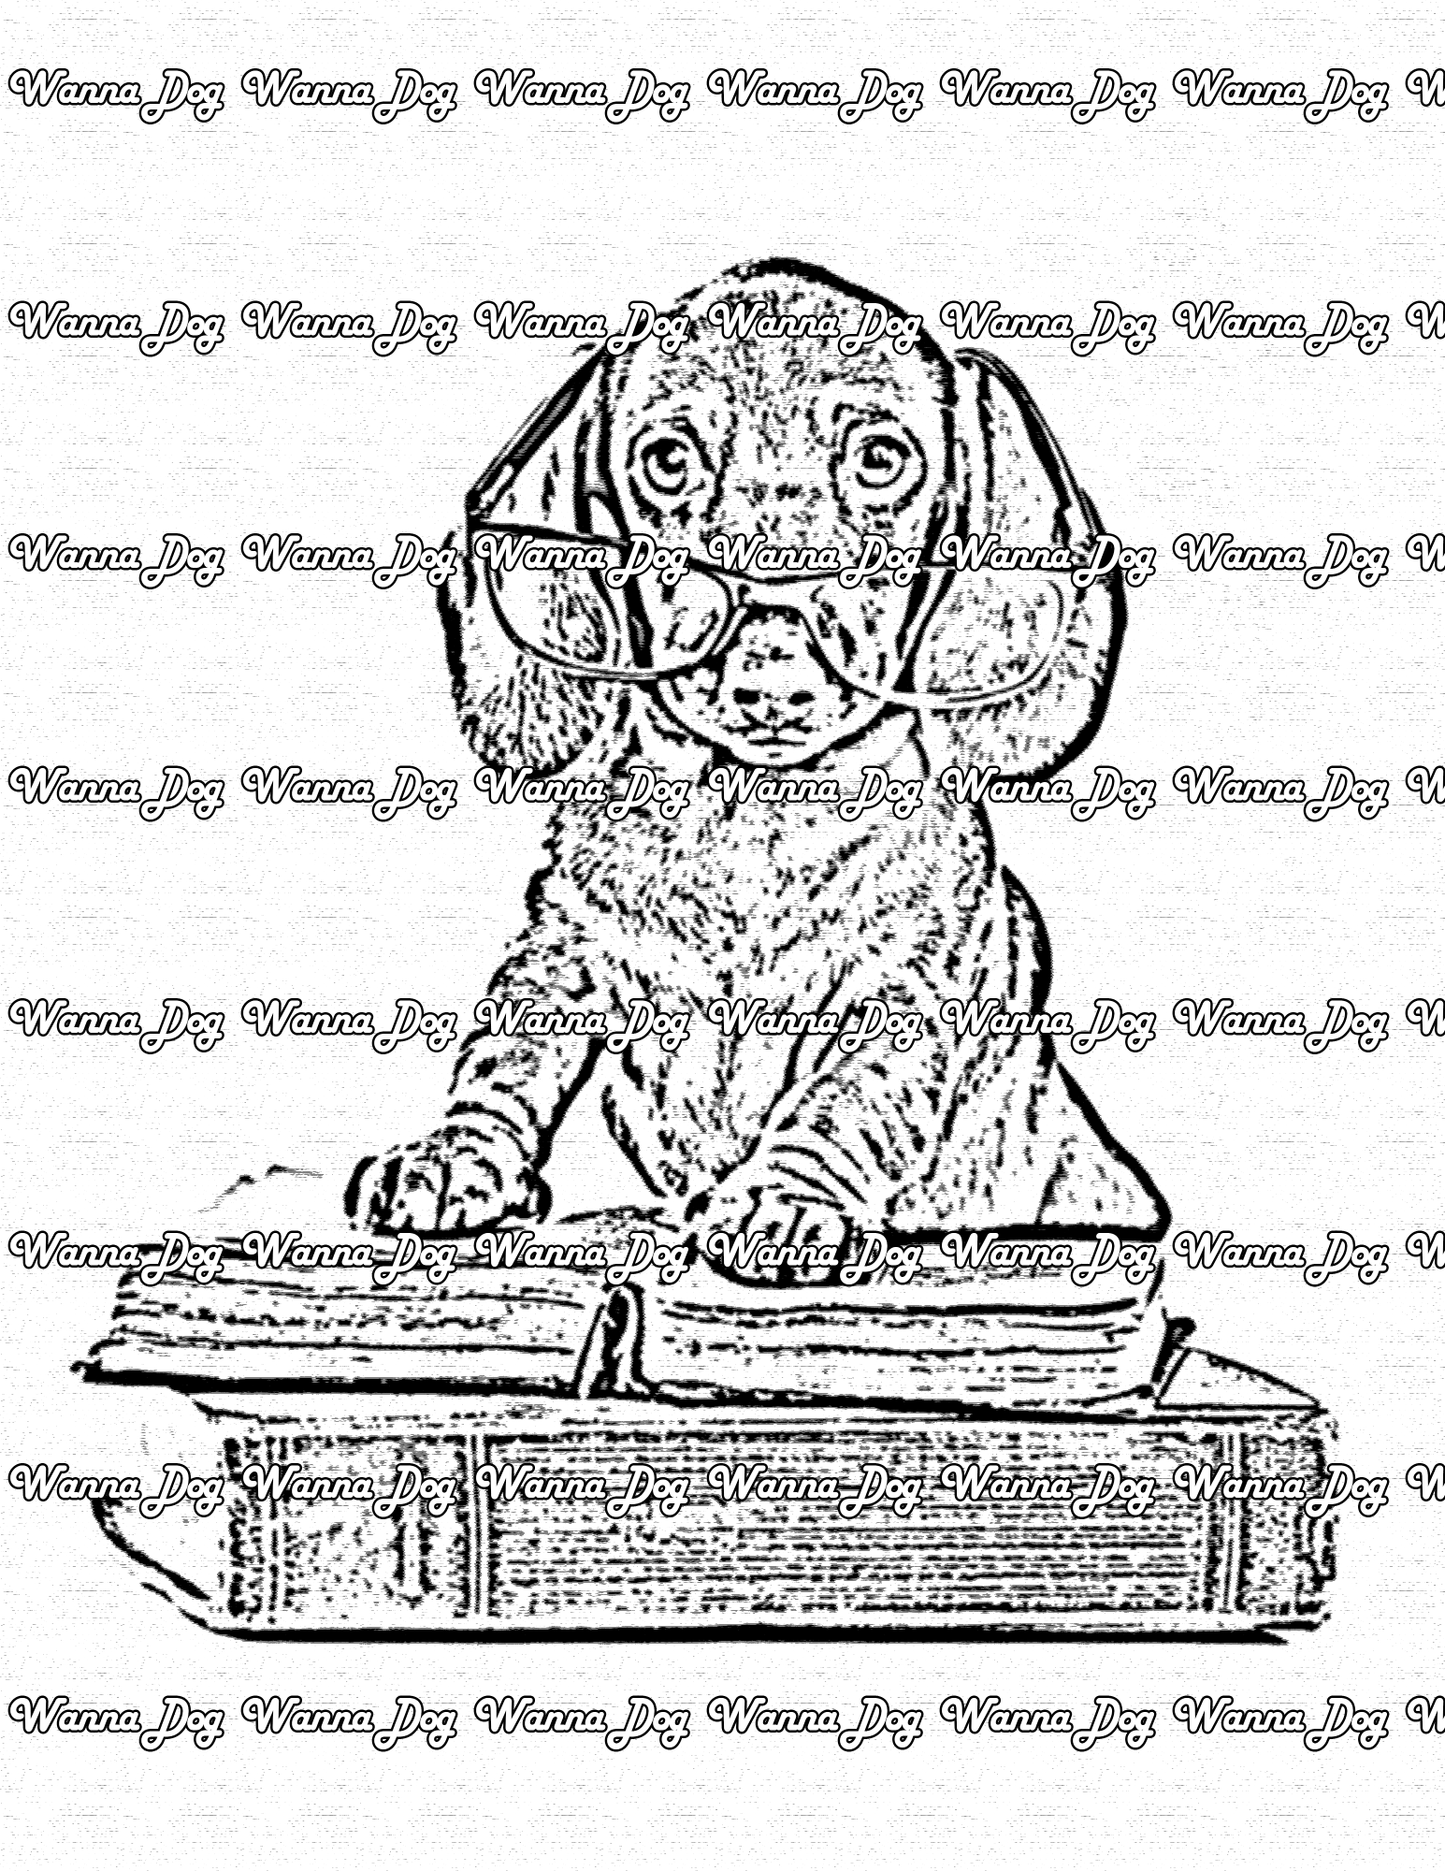 Dachshund Coloring Page of a Dachshund reading with glasses